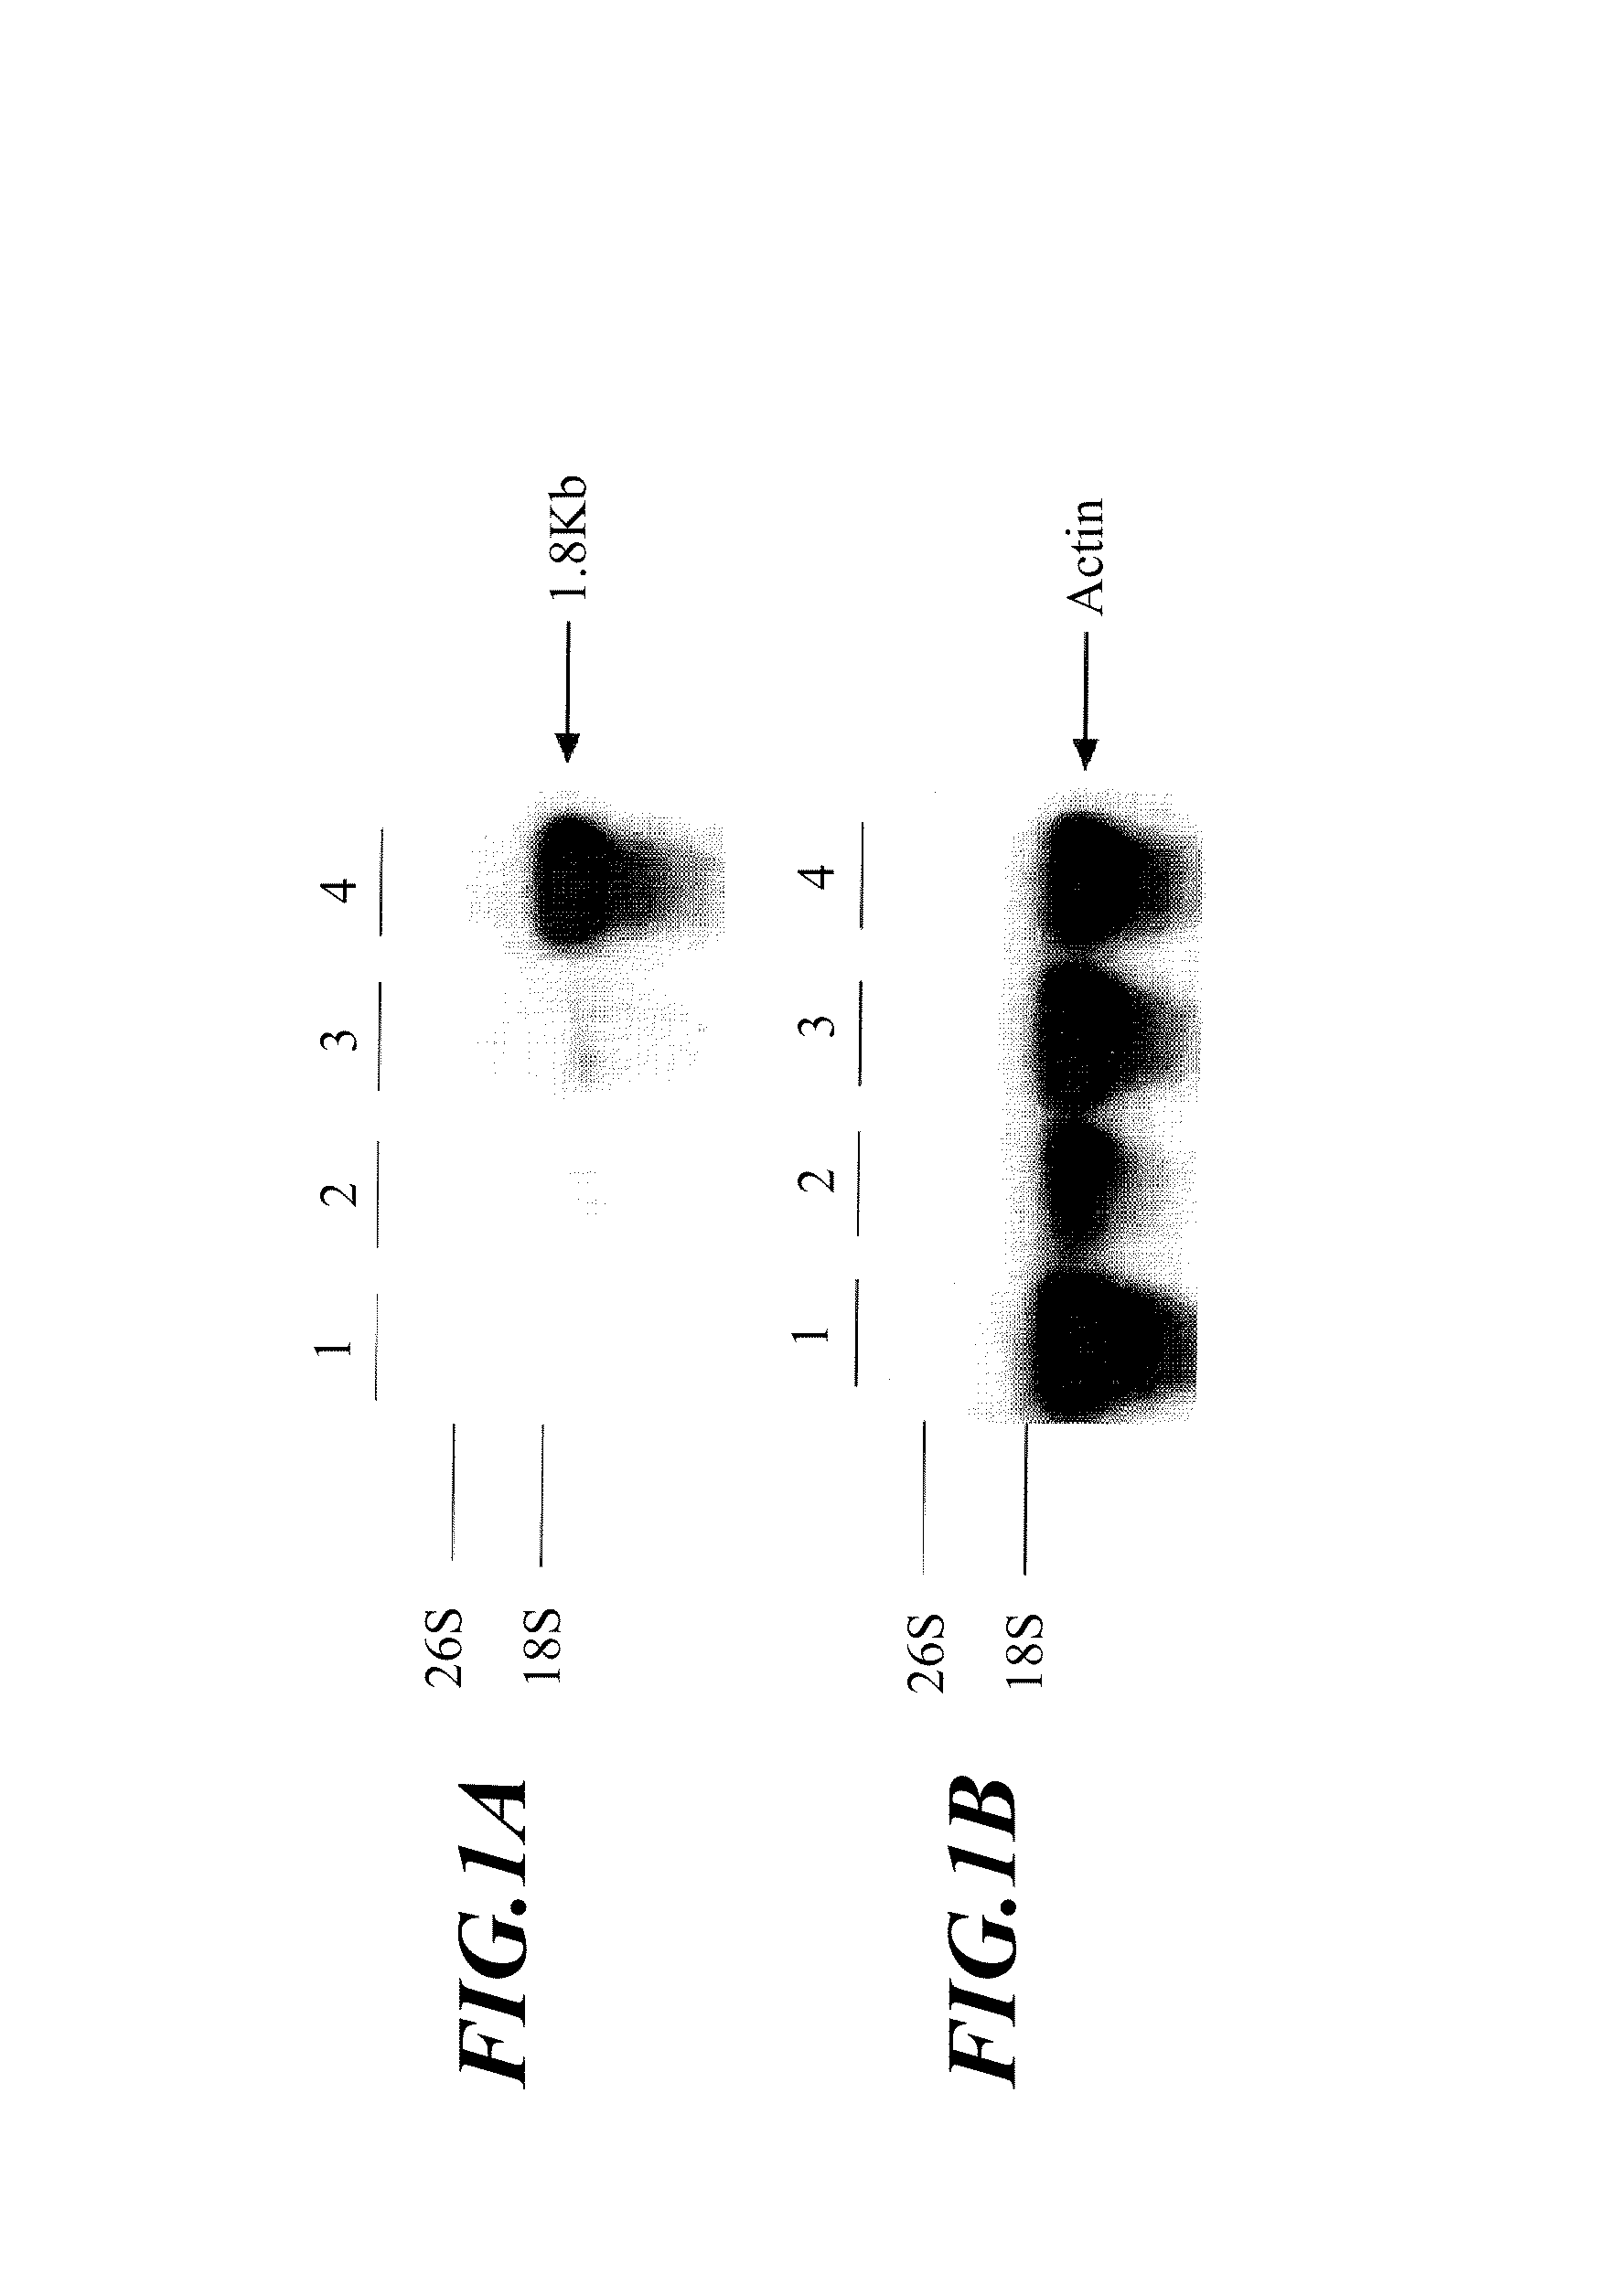 Anther-specific expression promoter in plant and application thereof